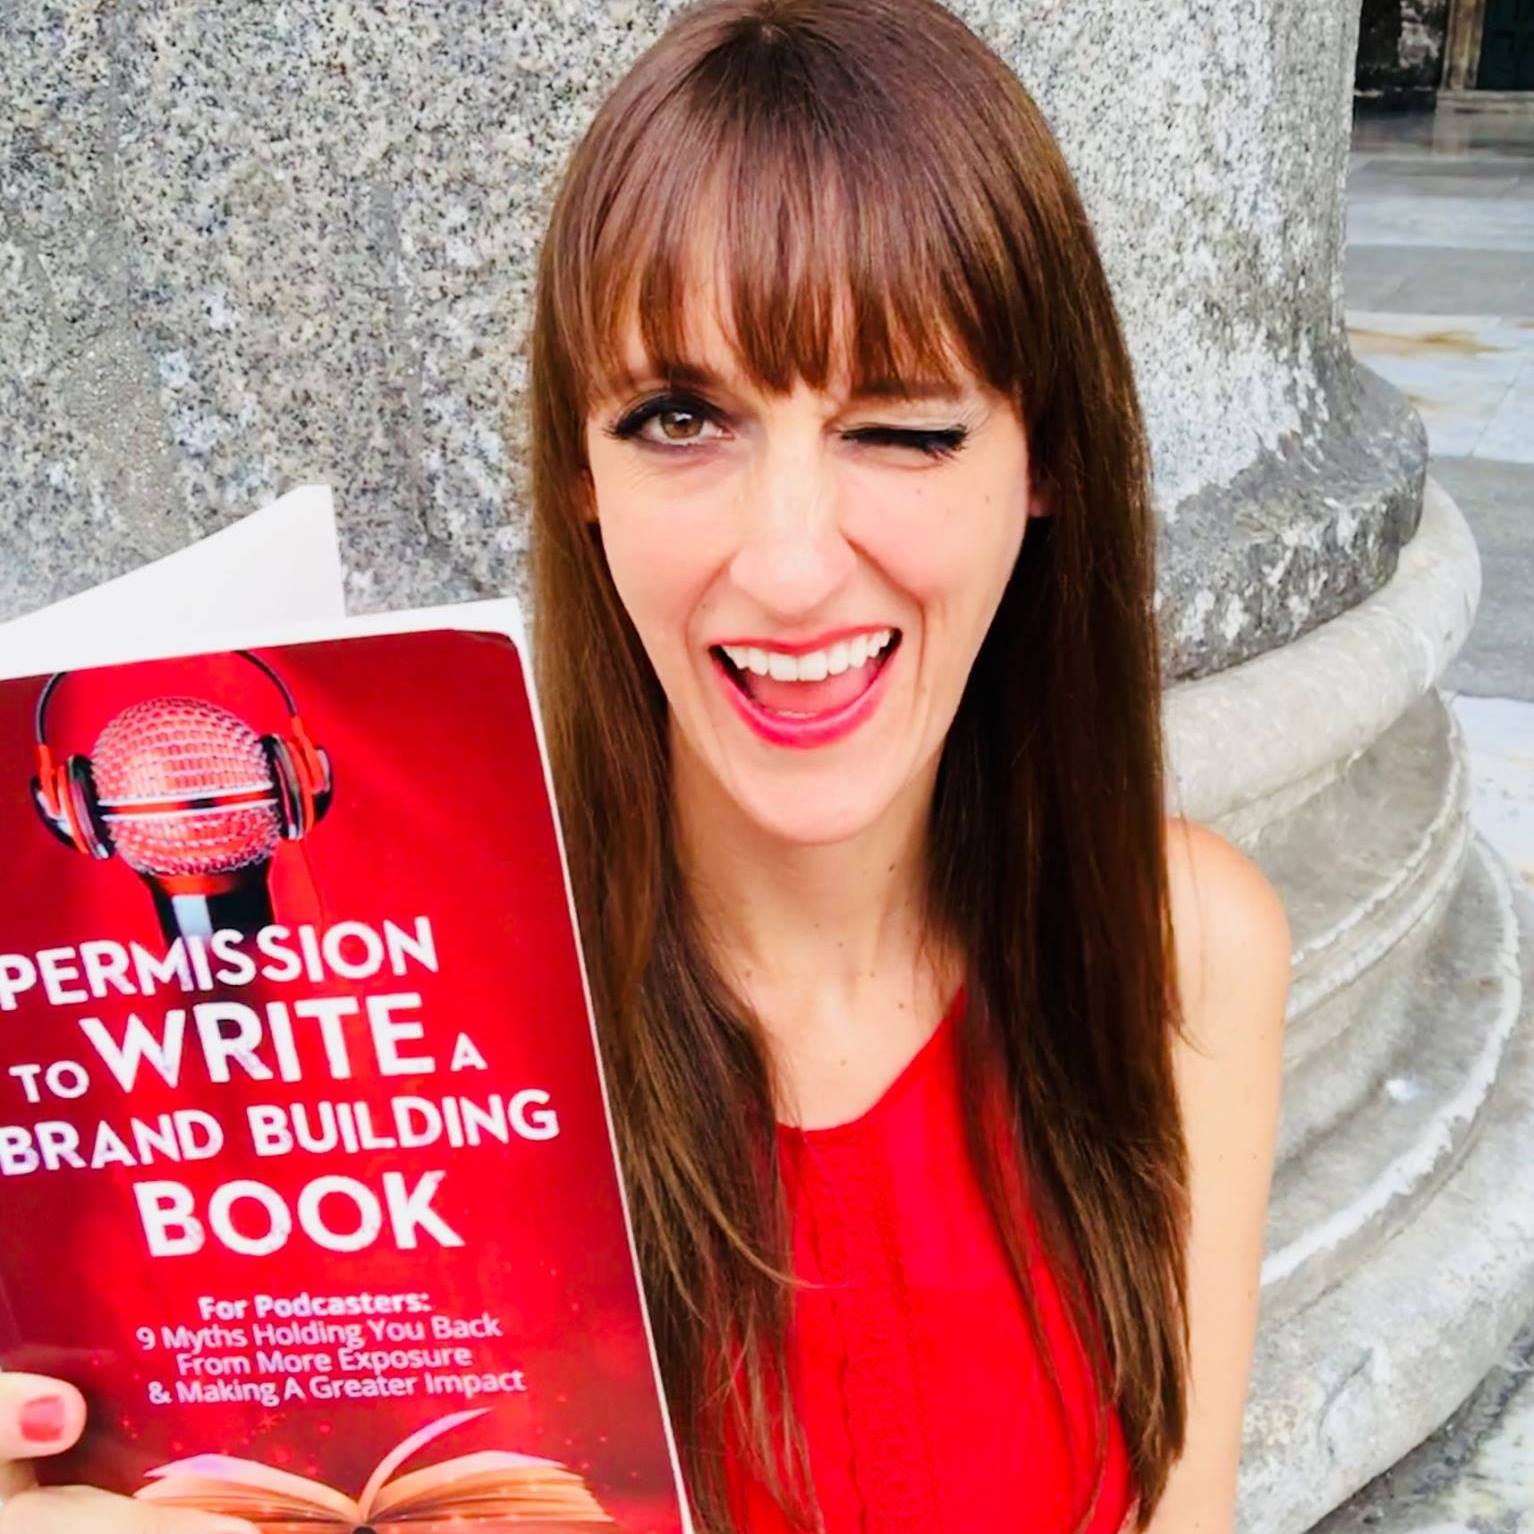 laura petersen of copy that pops and book that pops - bestselling author maker